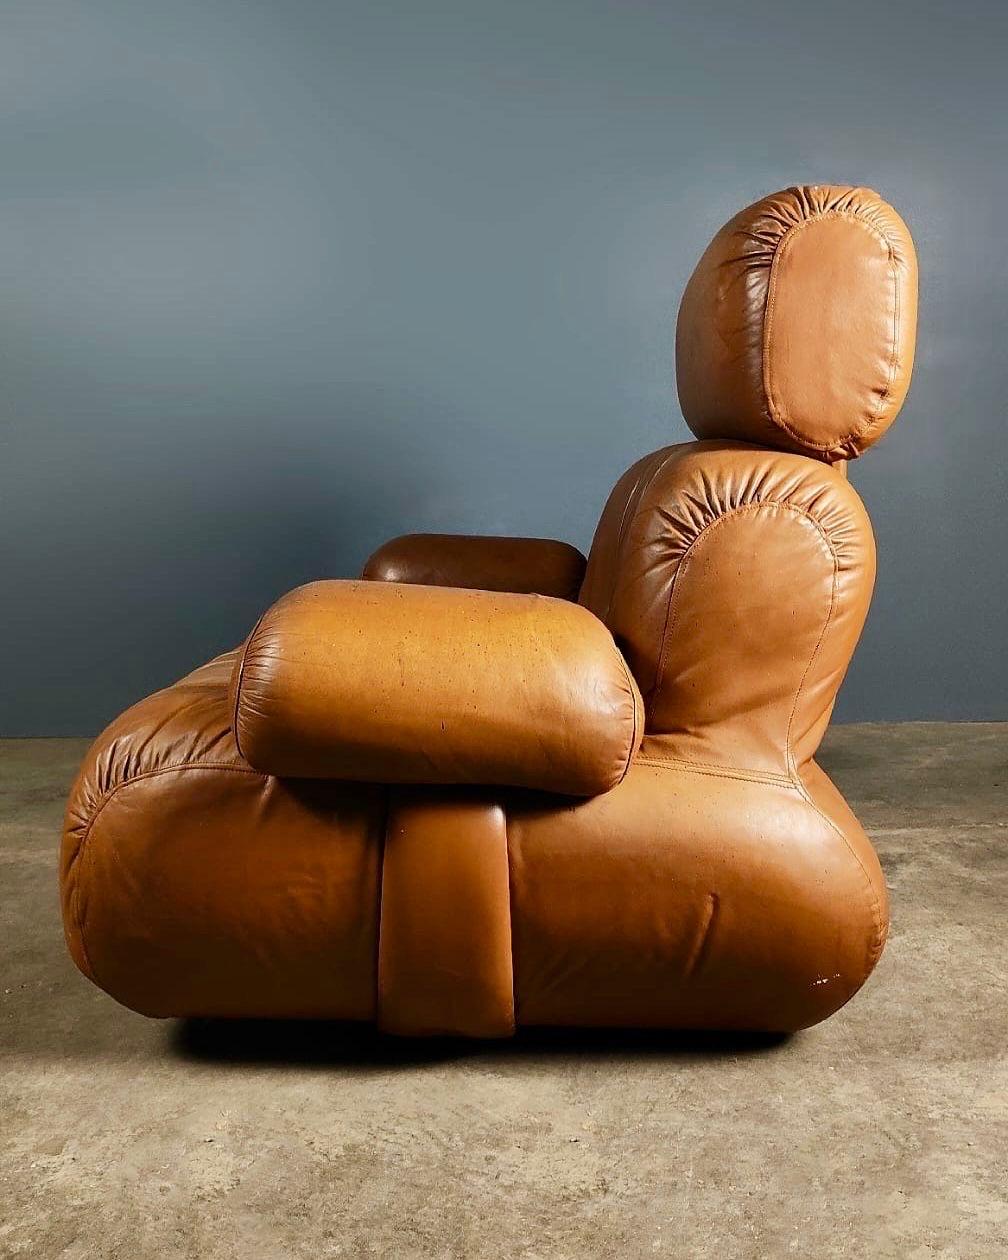 Unknown Oversized Lounge Chair Tan Cognac Leather Cuddle Bubble Shaped Armchair Retro